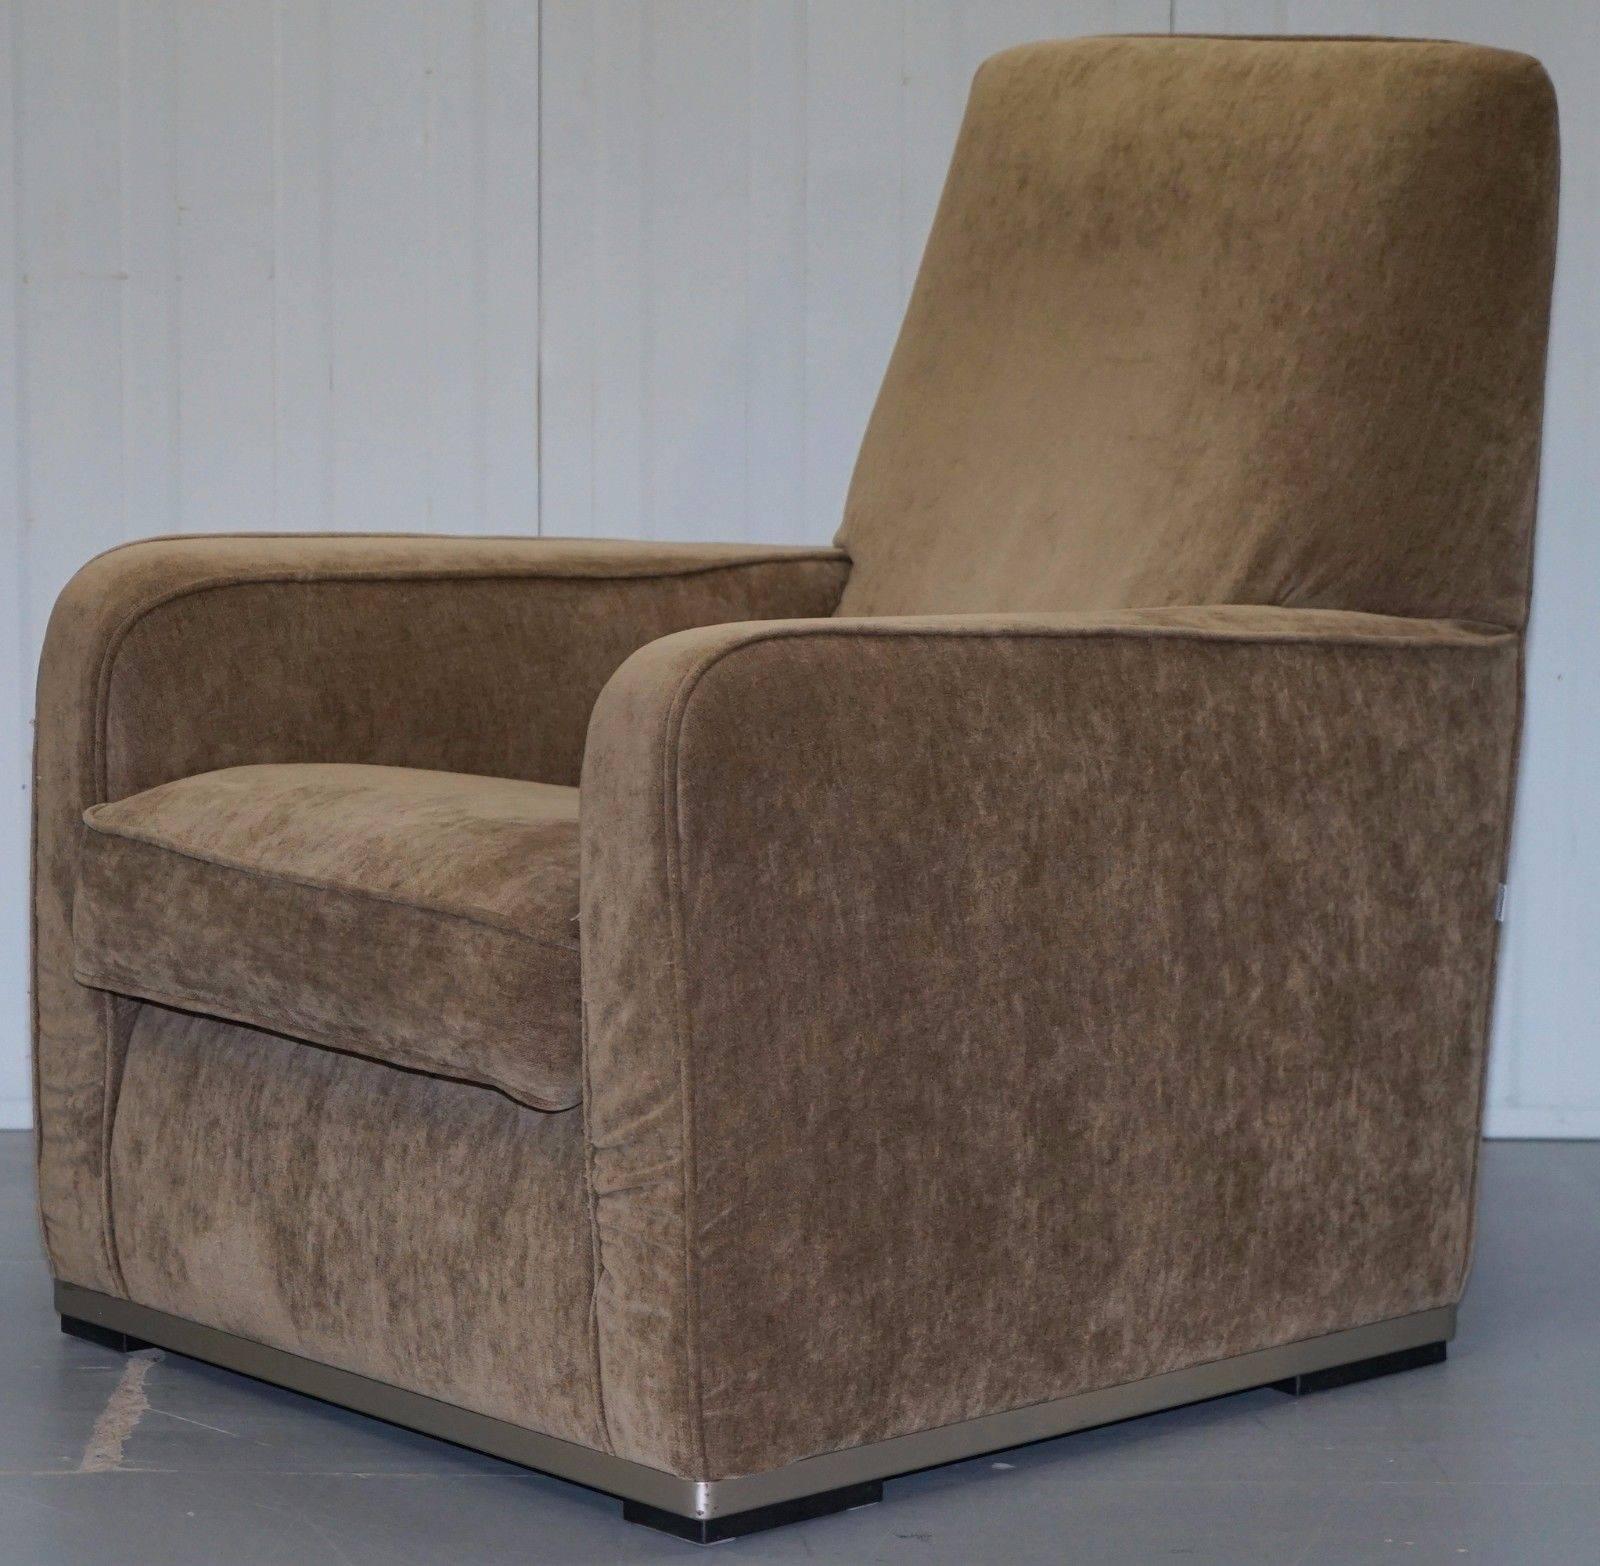 We are delighted to offer for sale this stunning pair of high back B&B Italia hand made in Italy Maxalto Imprimatur armchairs designed by Antonio Citterio RRP £6000.

The chairs are in lovely used condition throughout, the upholstery is velvet so